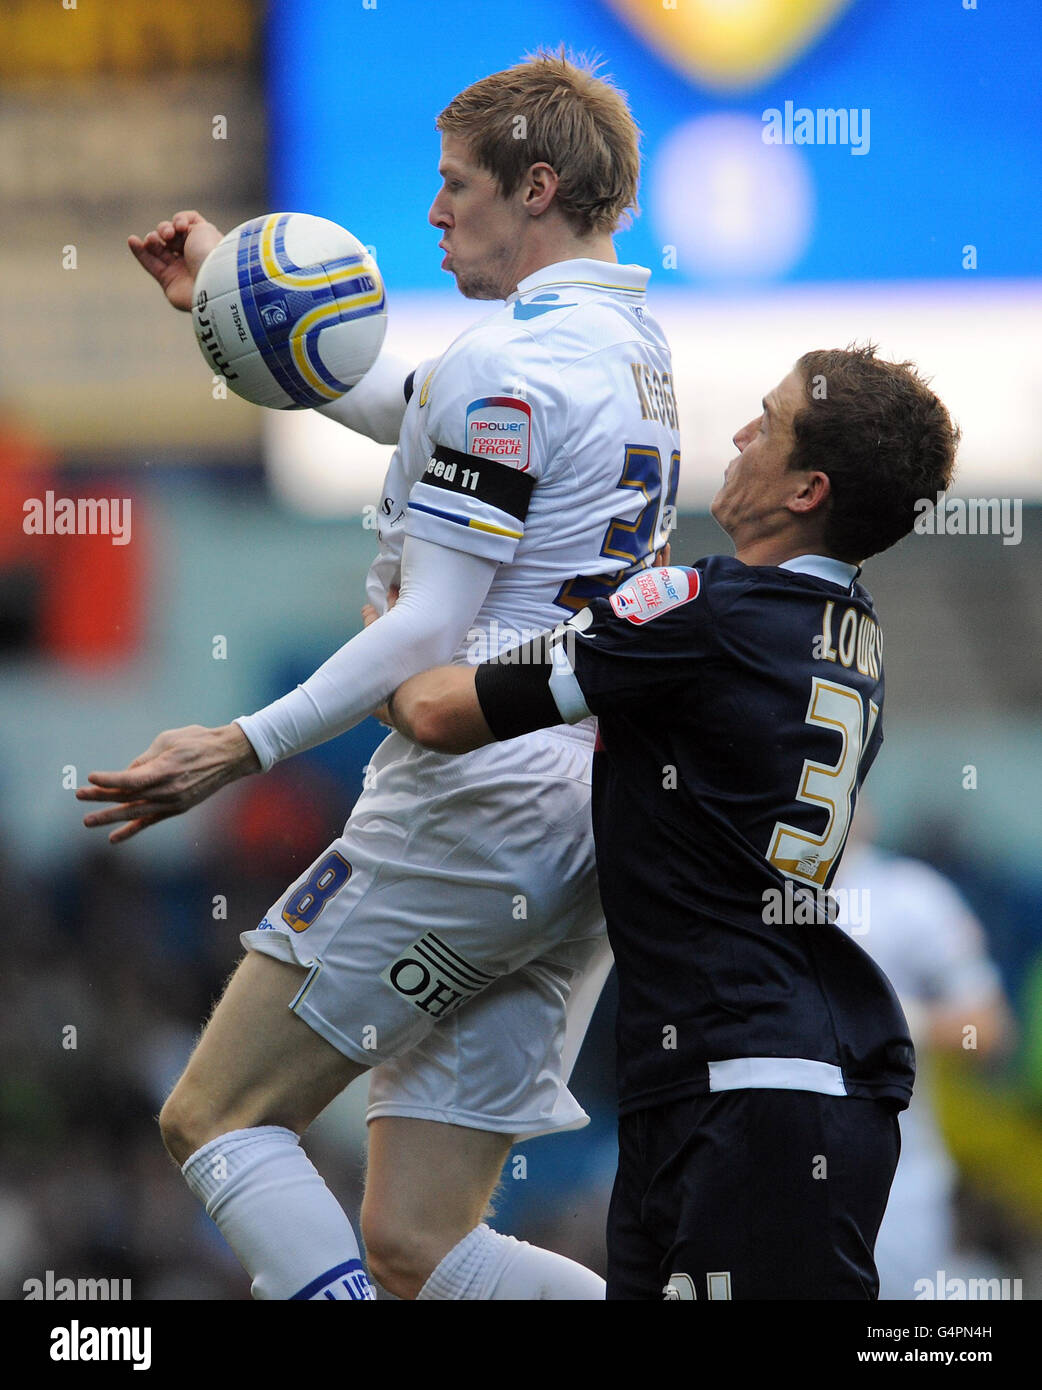 Millwall FC - Look at photos from Millwall's 1-0 victory over Leeds United